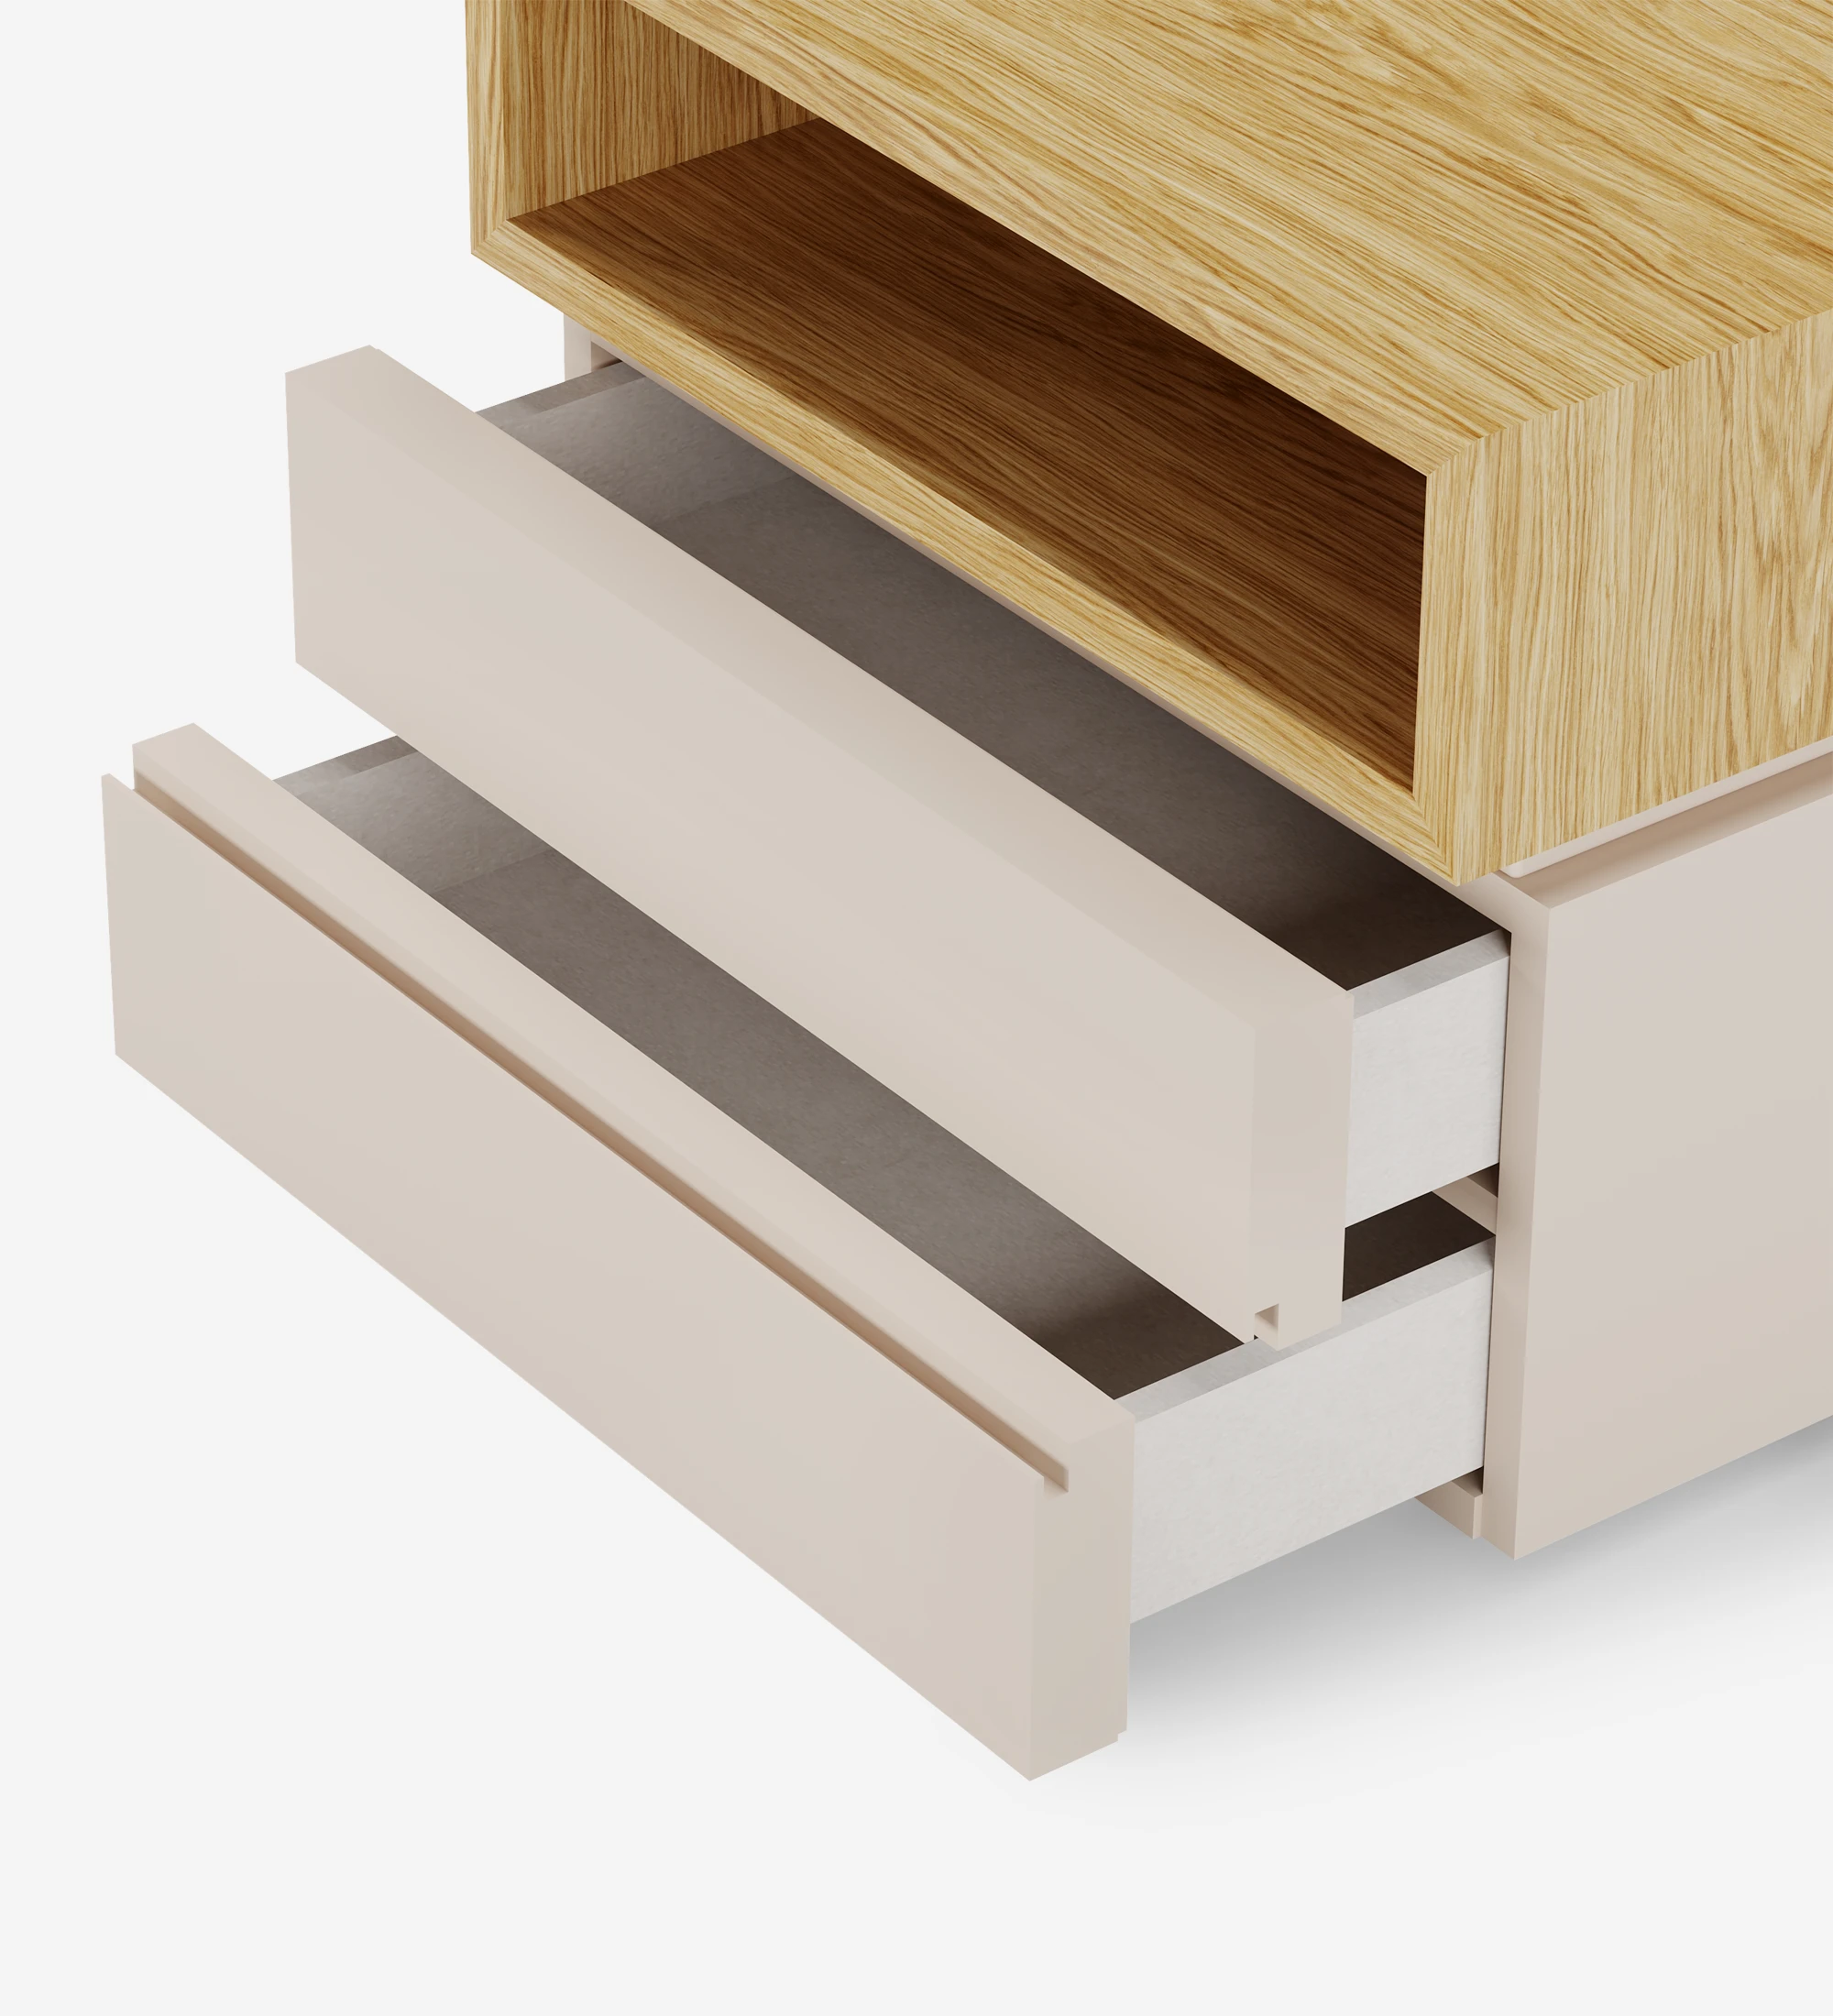 2 drawers and structure in pearl lacquer and natural oak module